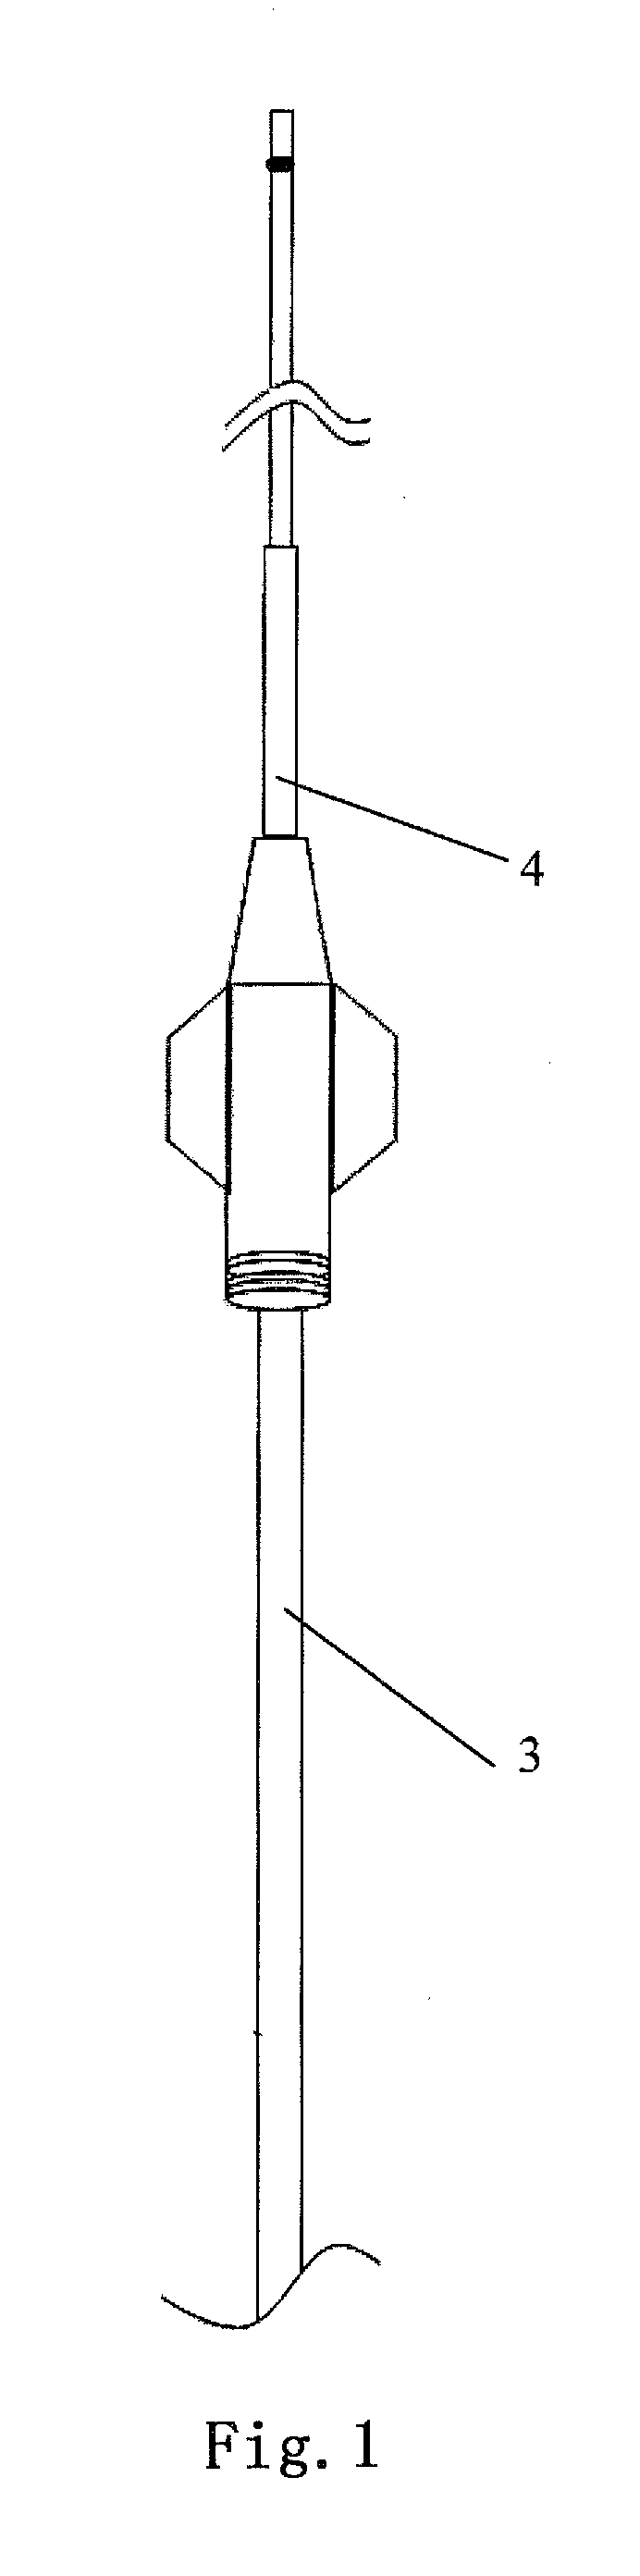 Surgical apparatus for aneurysms